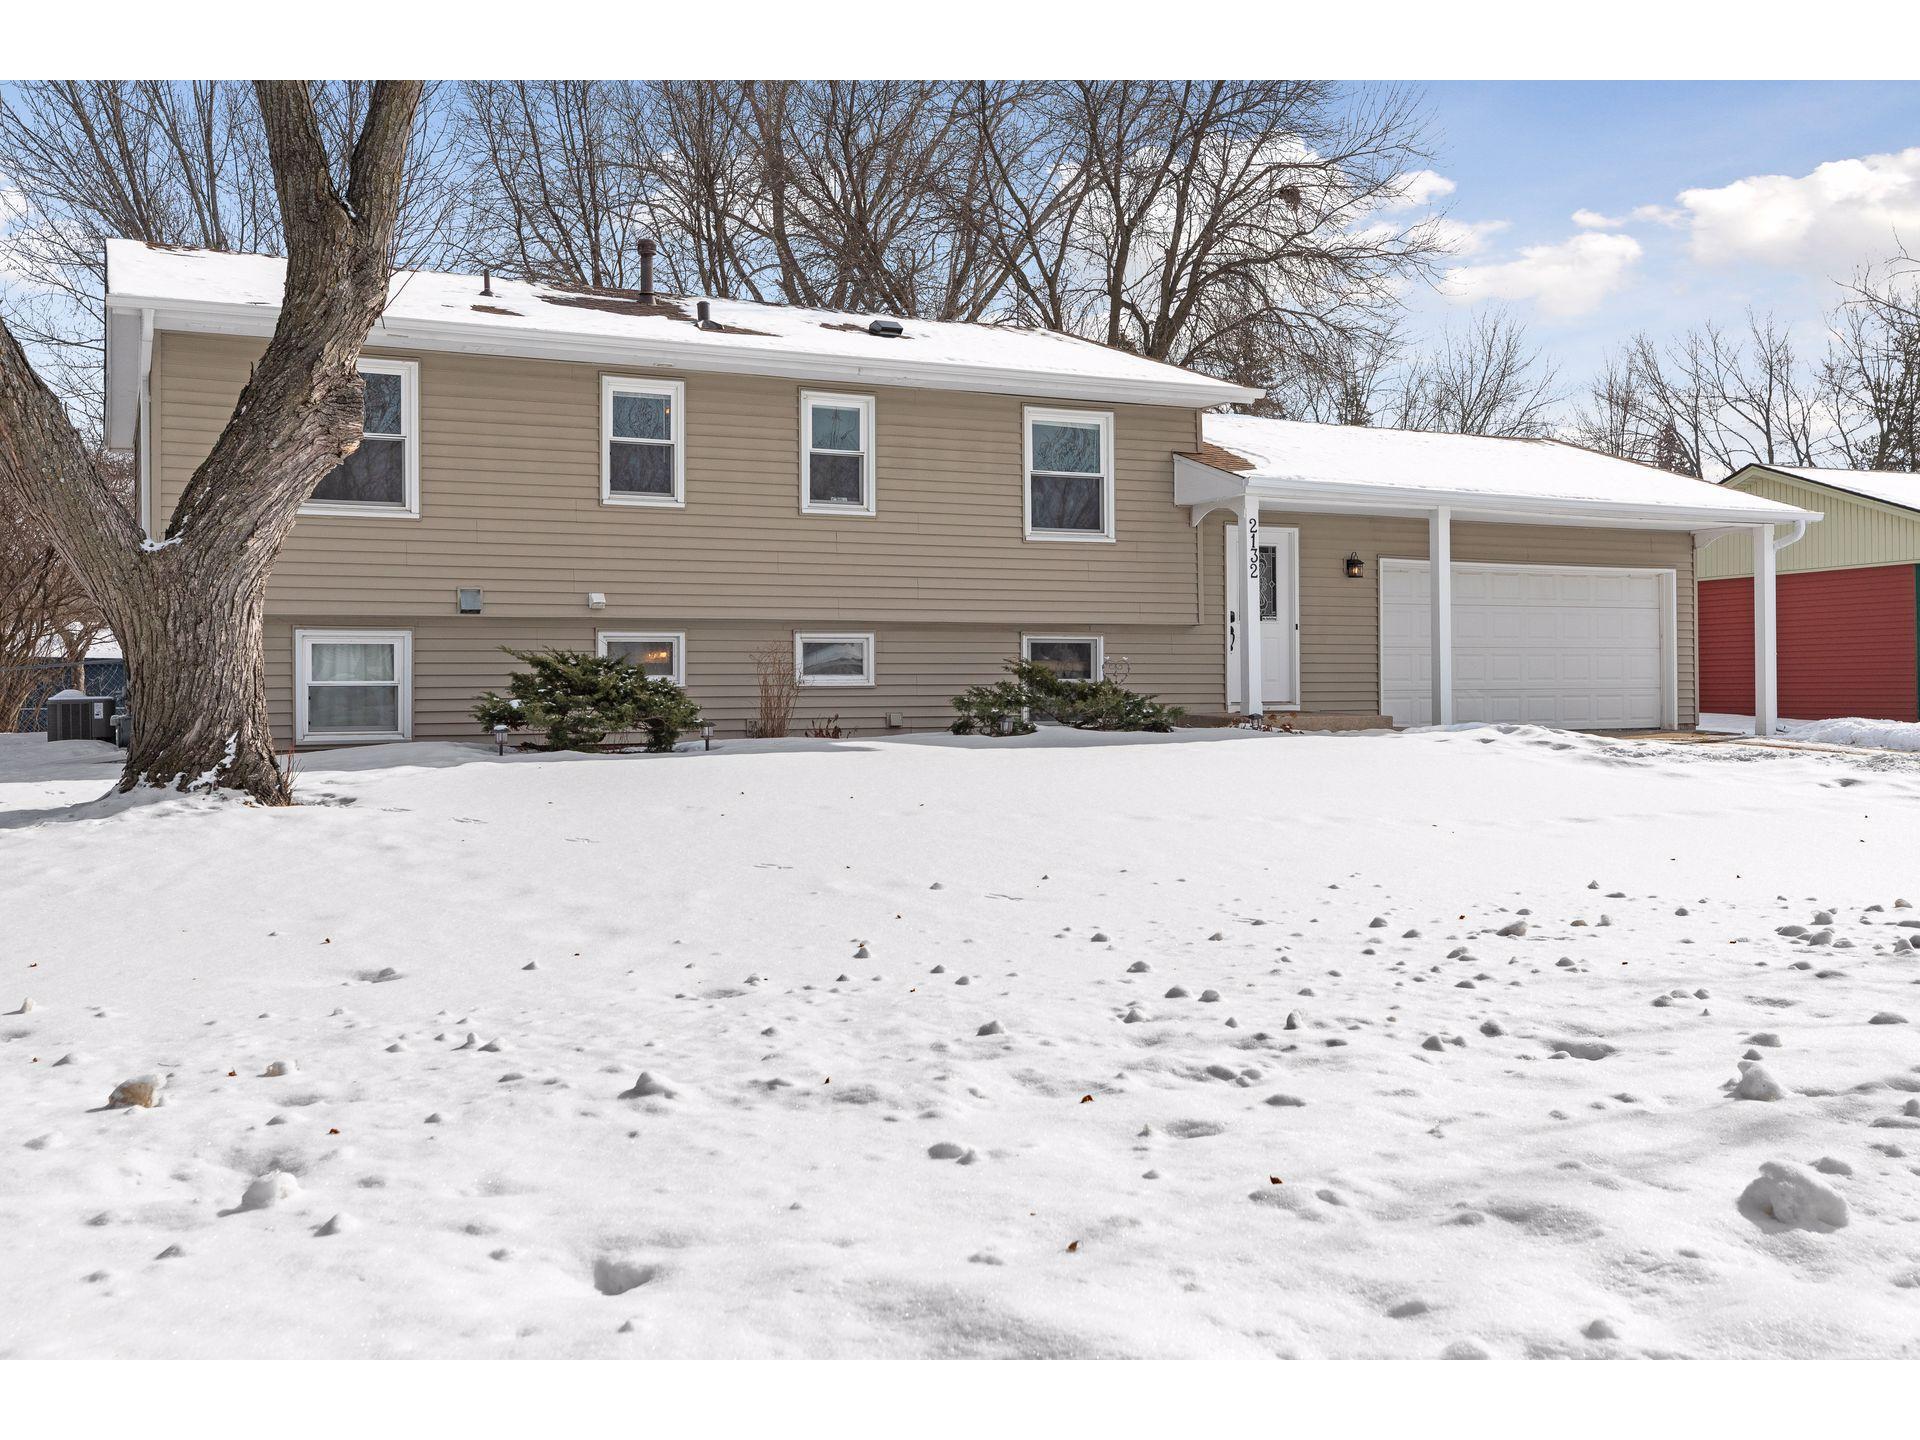 2132 103rd Avenue NW Coon Rapids MN 55433 6153629 image1